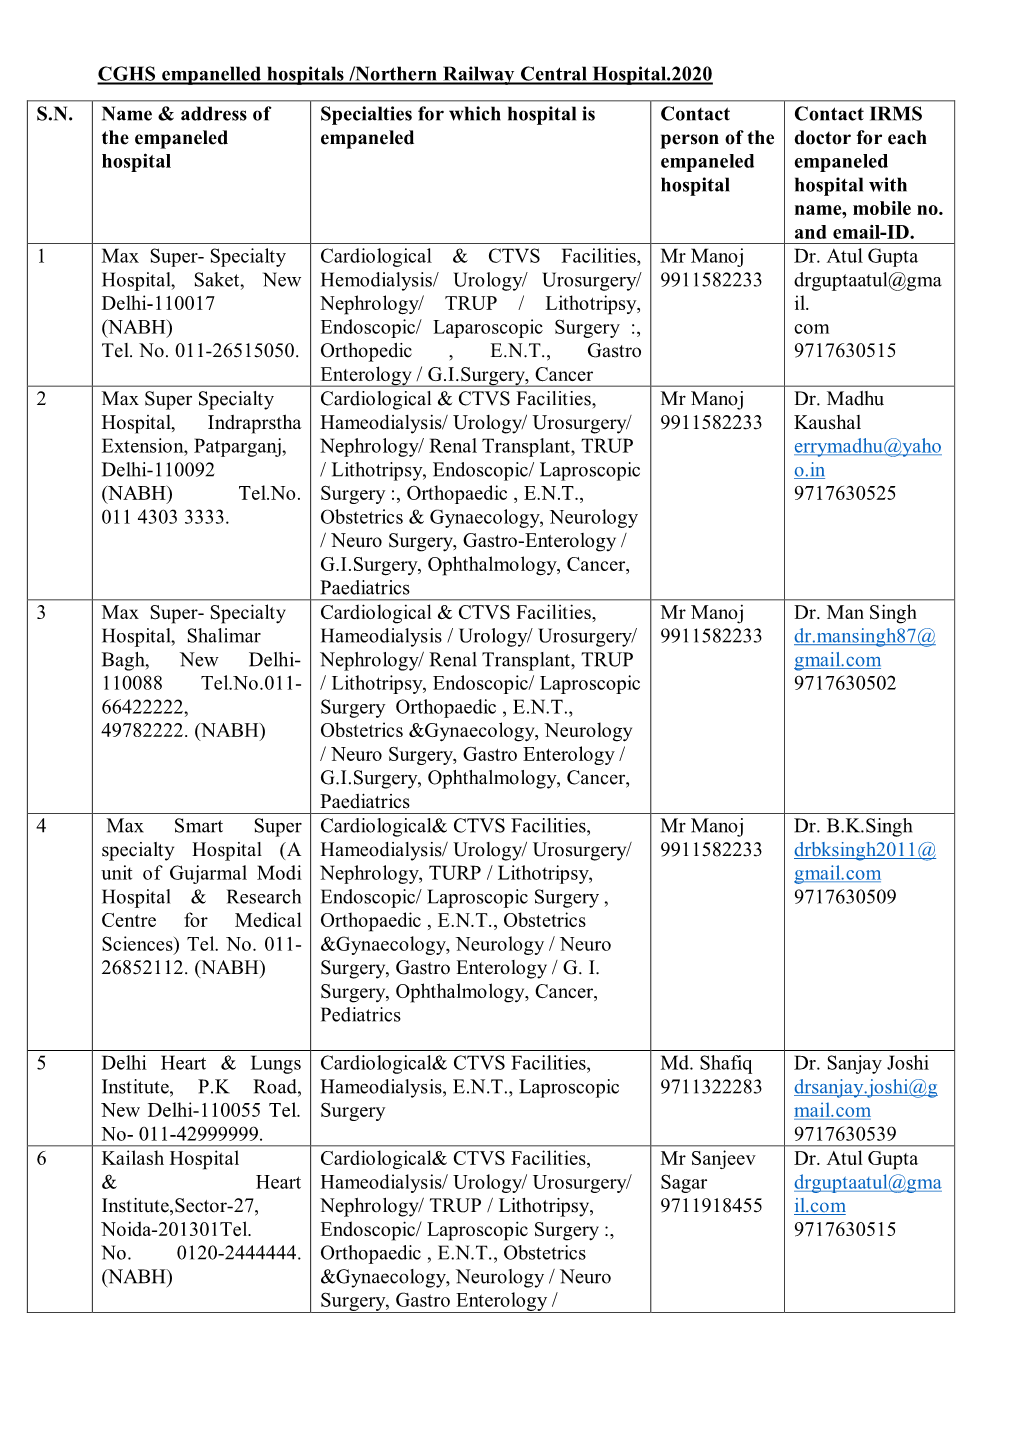 List of CGHS Empanelled Hospitals/Northern Railway Central